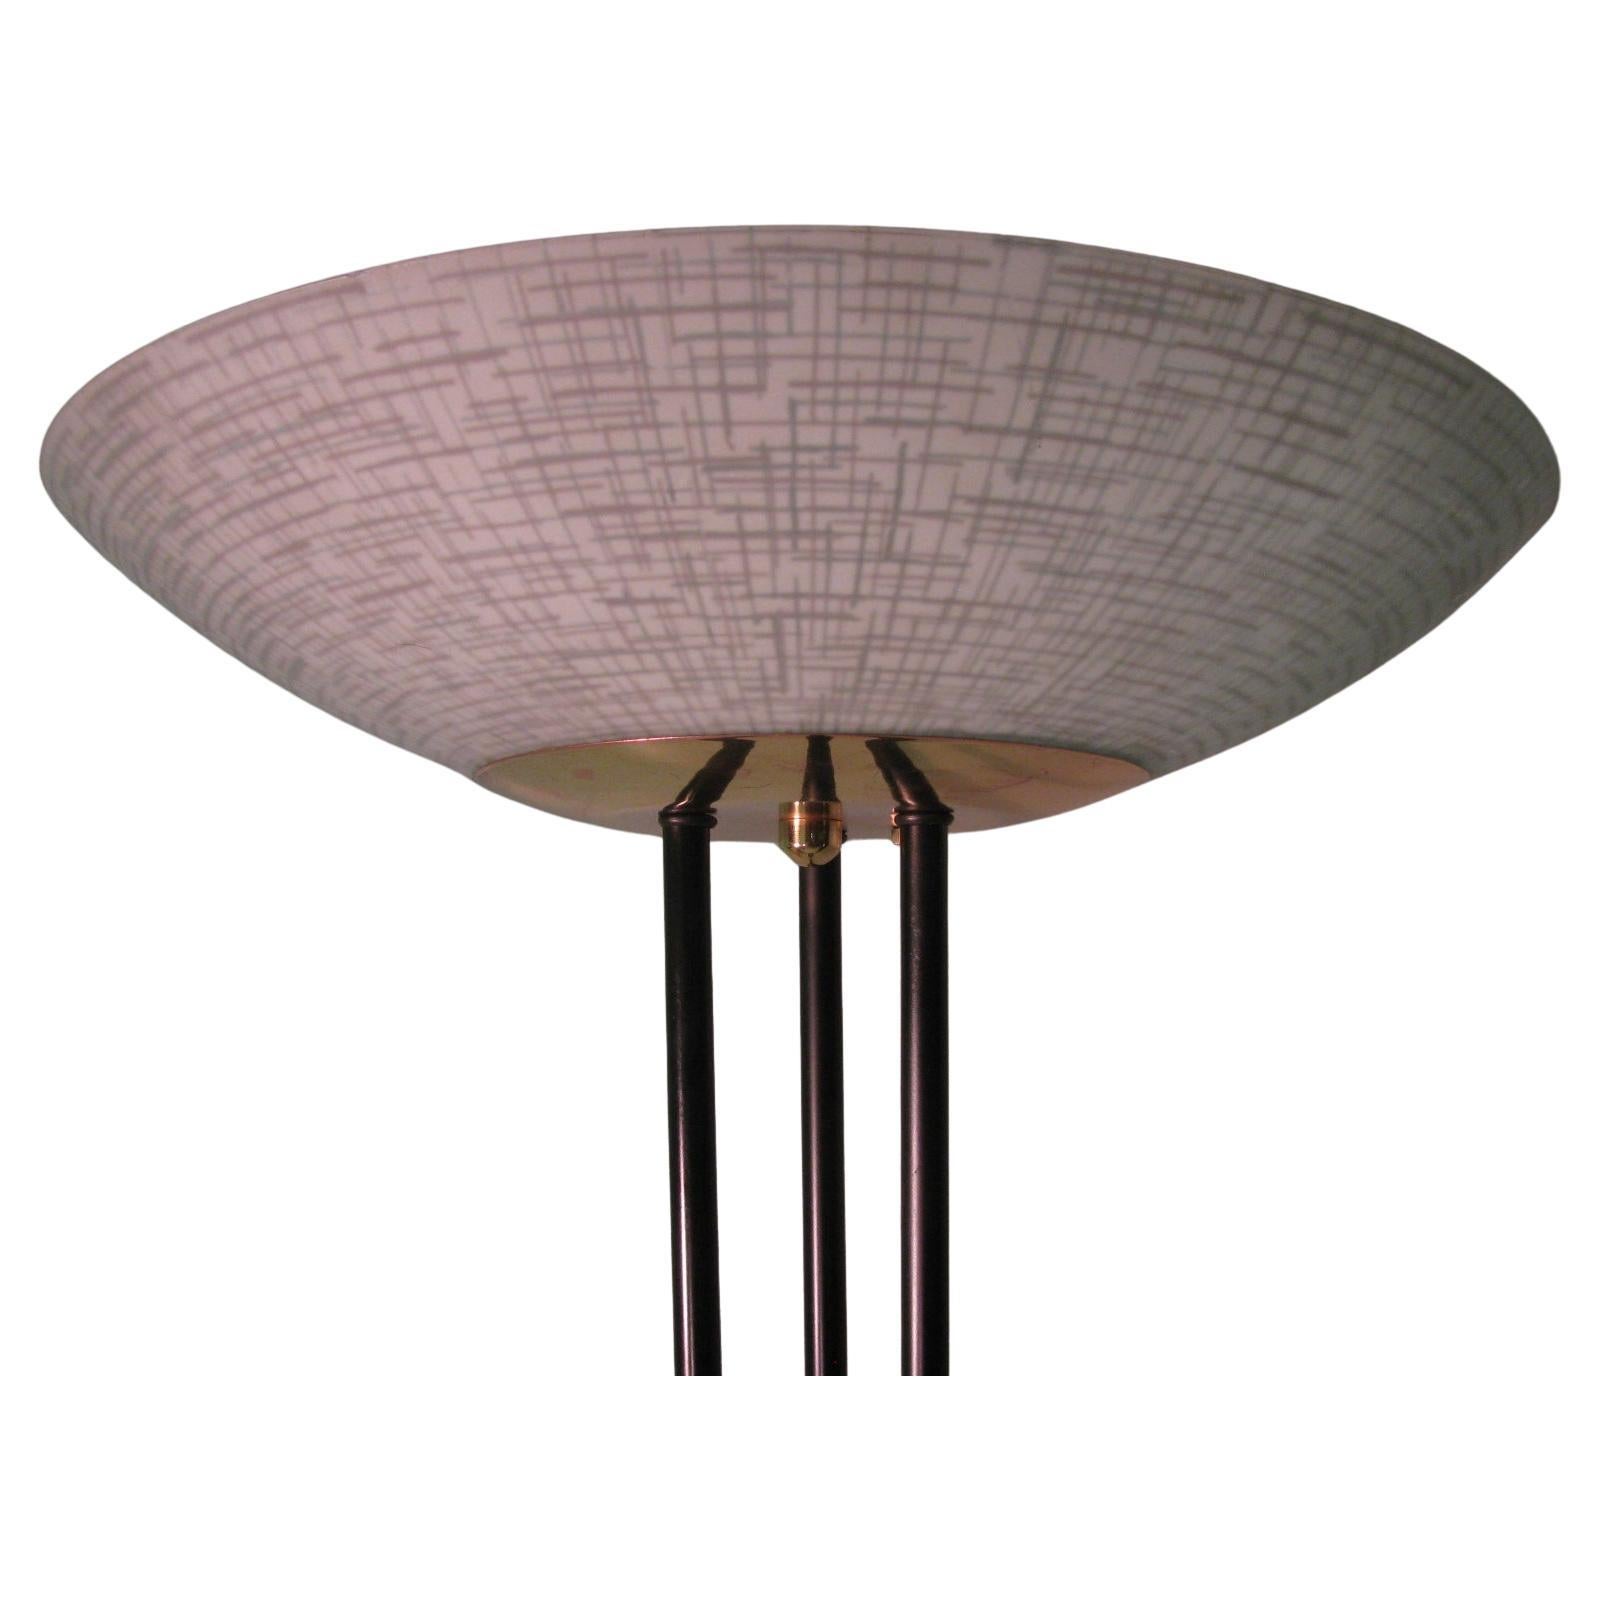 Fabulous and a beautiful torchiere floor lamp by Gerald Thuston for Lightolier. Glass dish rests on a brass plate supported by three rods which are connected to the base. Base has a 14in. diameter. Lamp has been restored with fresh paint, polished